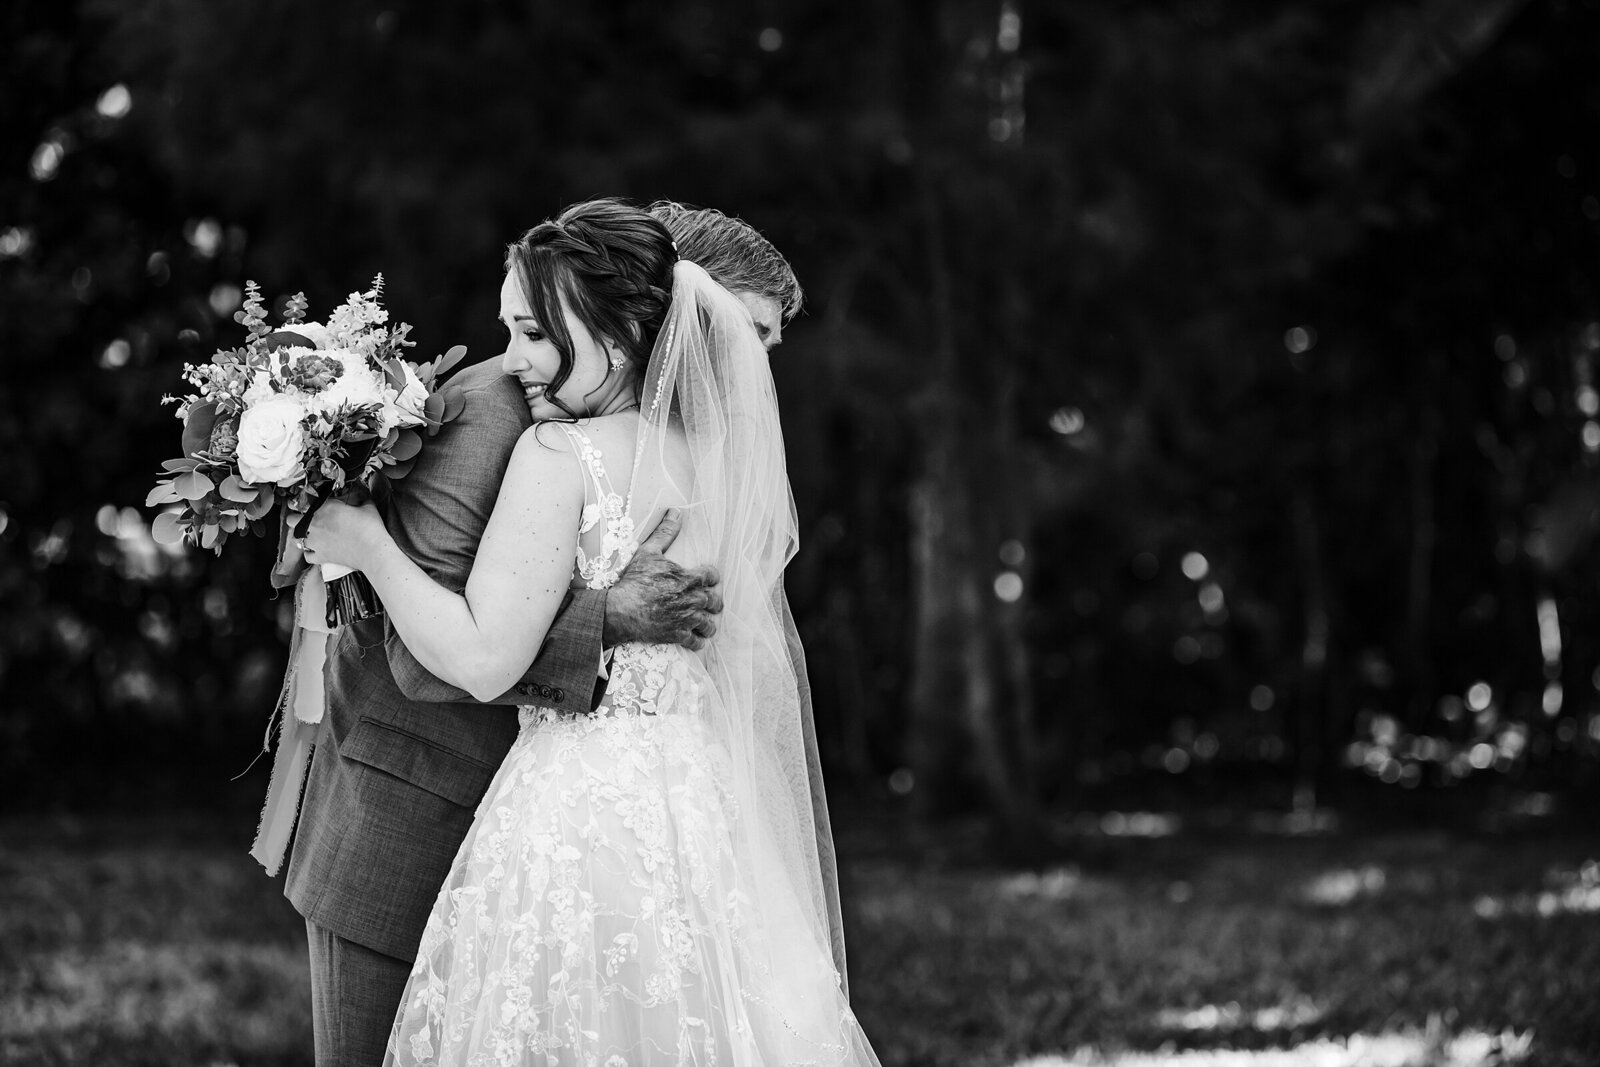 emotional wedding photos | The Delamater House Wedding | Chynna Pacheco Photography-387